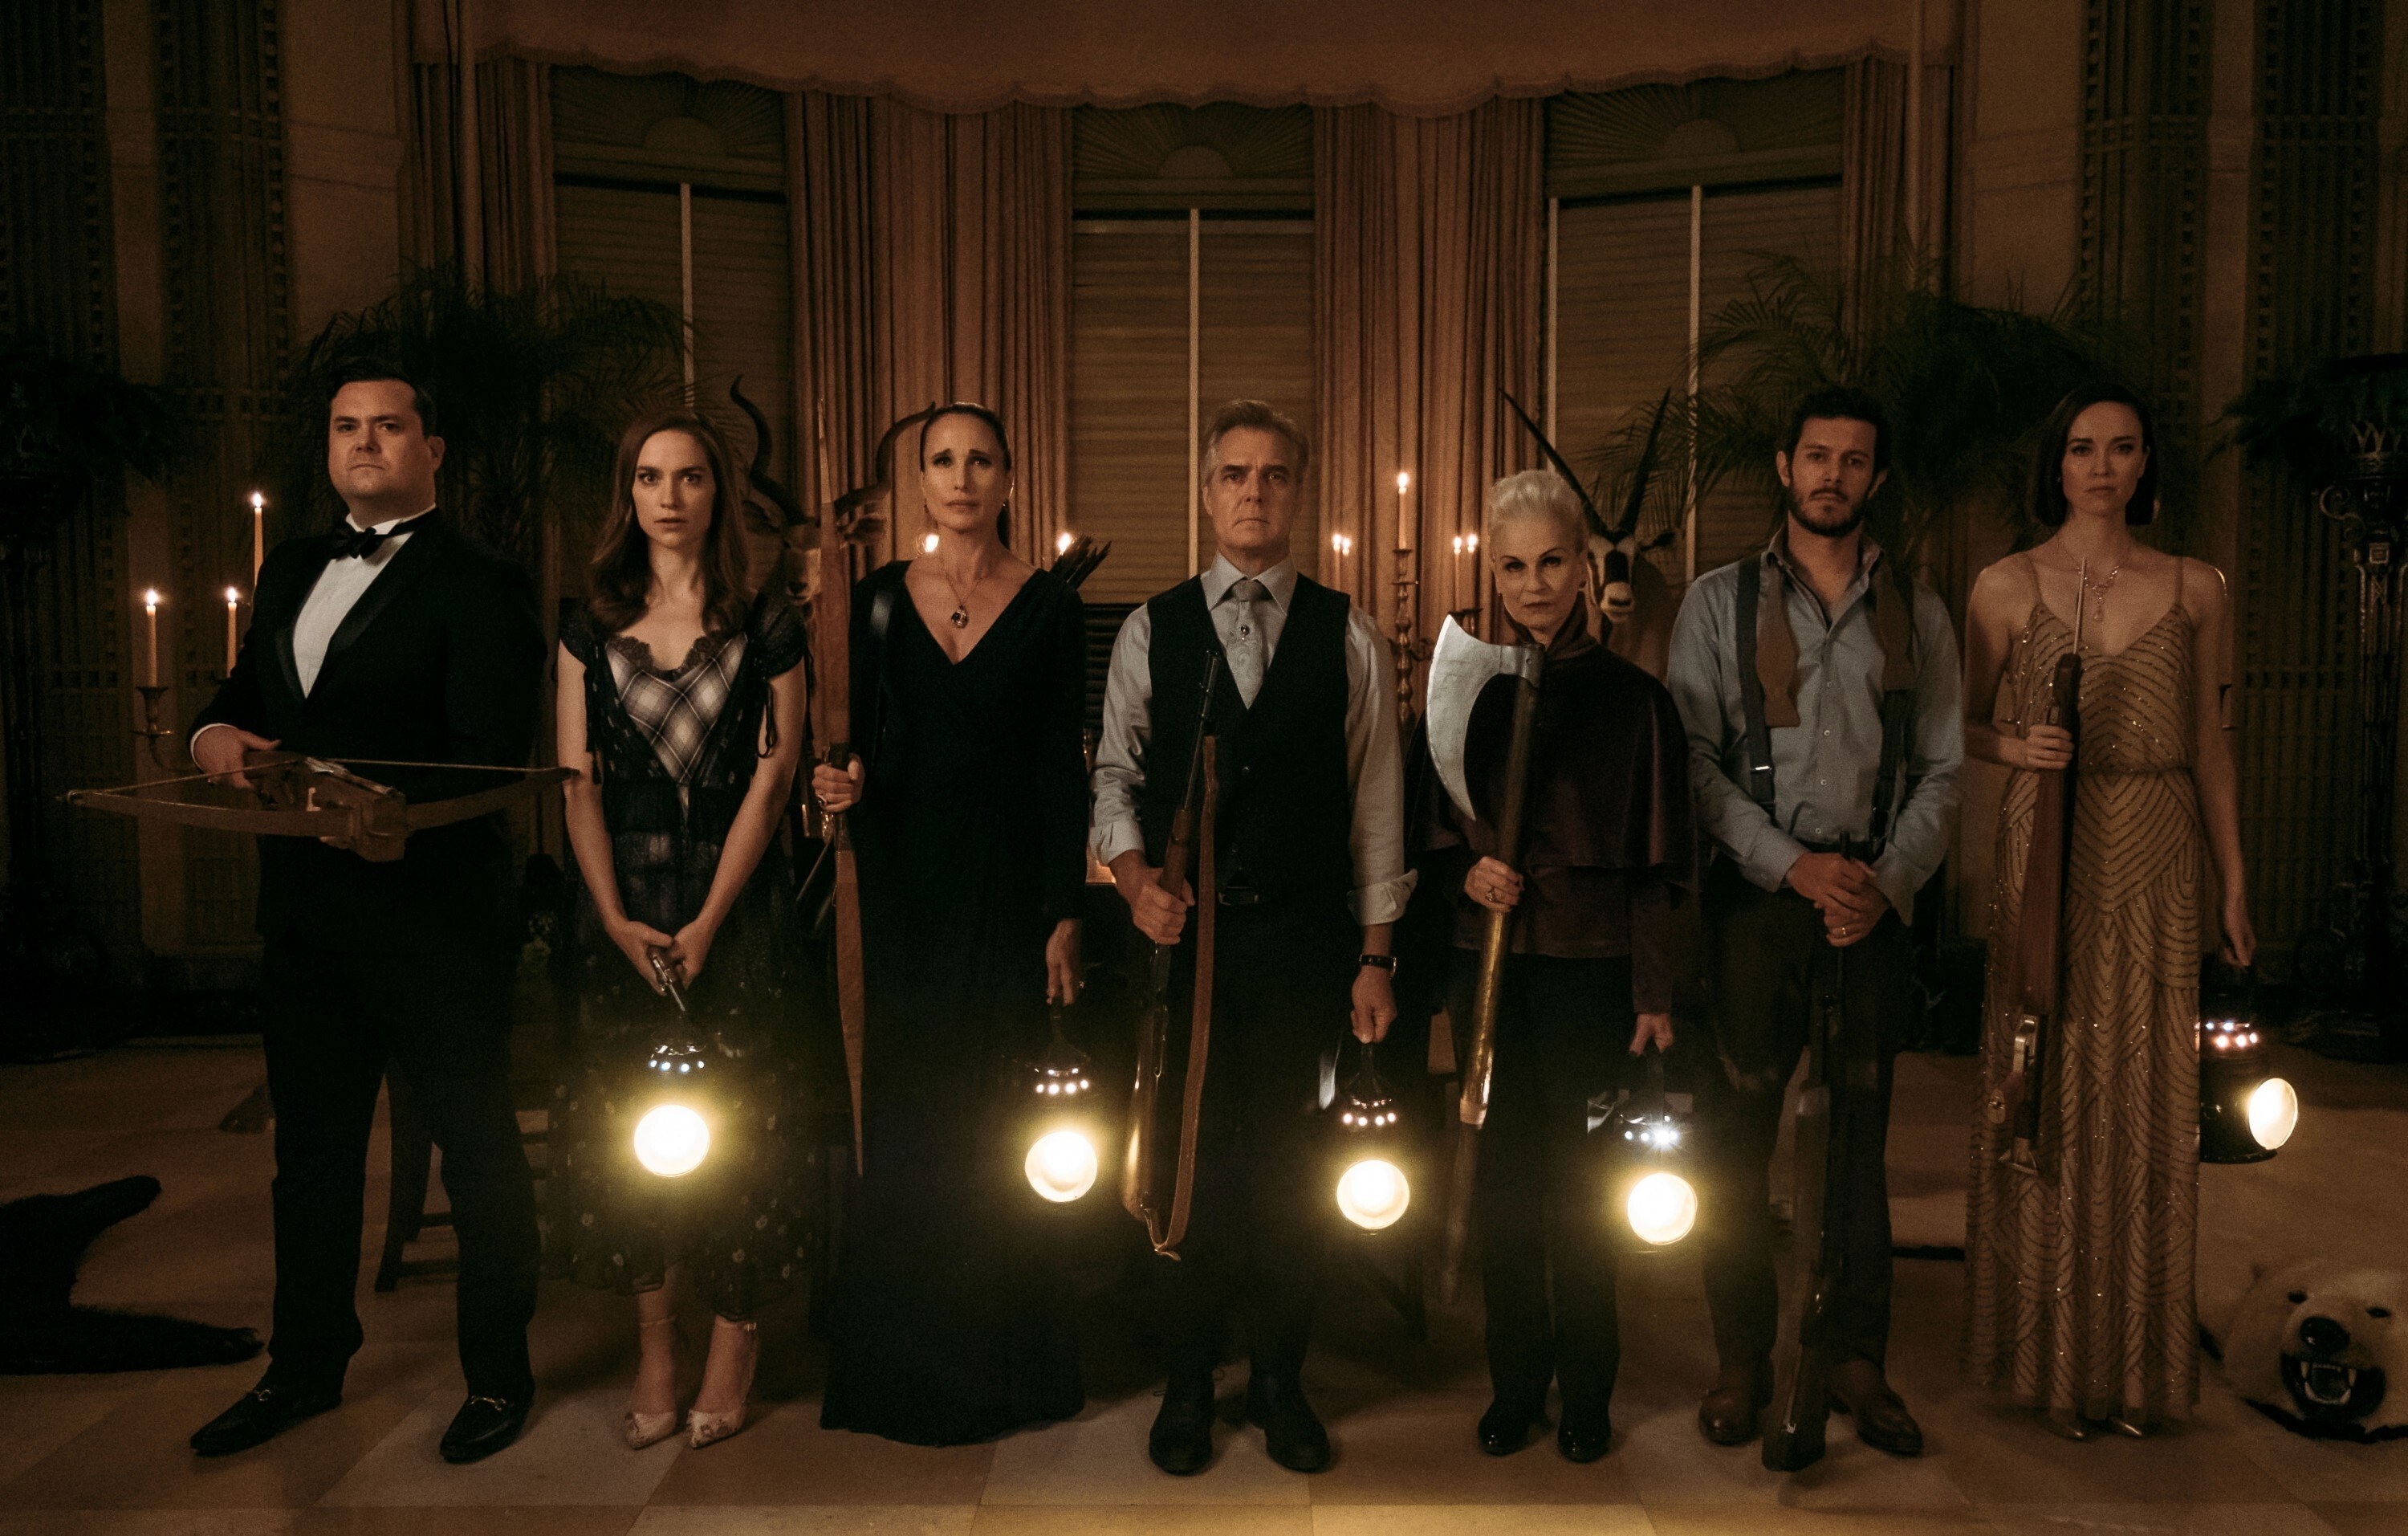 Kristian Bruun, Melanie Scrofano, Andie MacDowell, Henry Czerny, Nicky Guadagni, Adam Brody, and Elyse Levesque with lamps and weapons